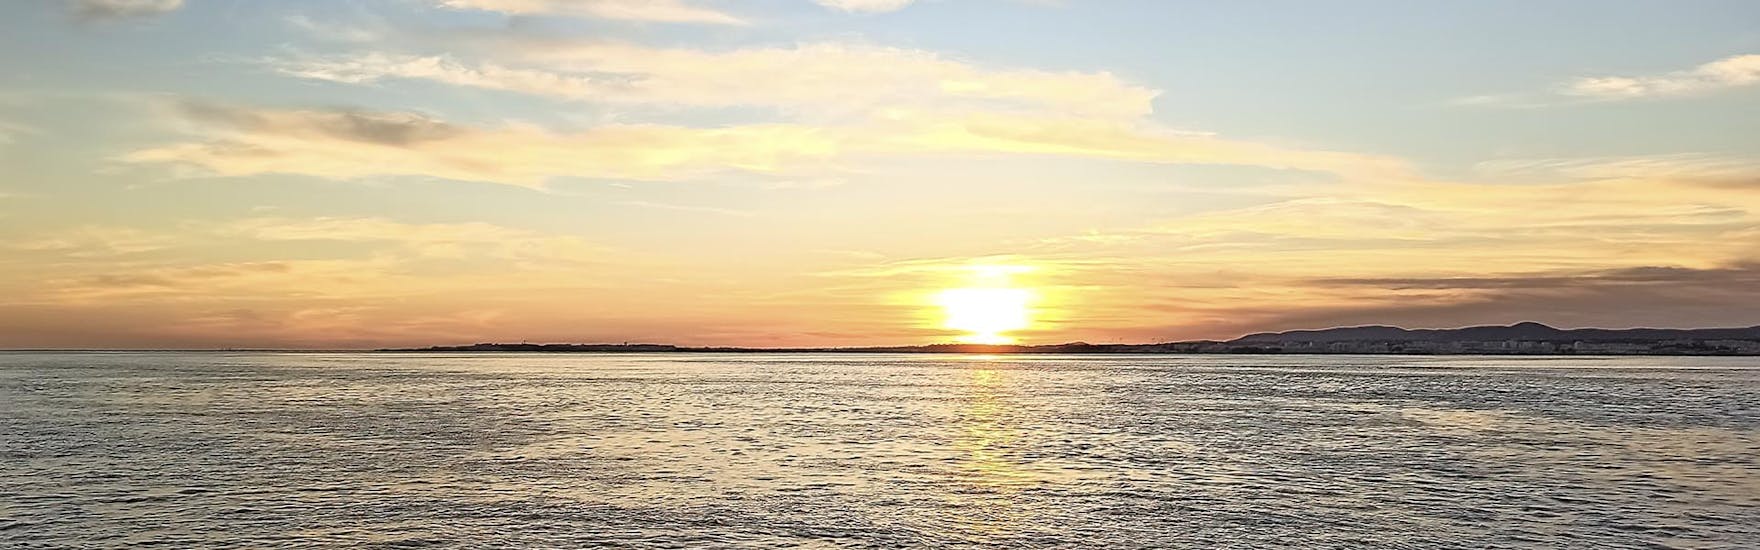 The sunset during the Sunset Boat Trip to Ria Formosa Natural Park of Islands 4 You.